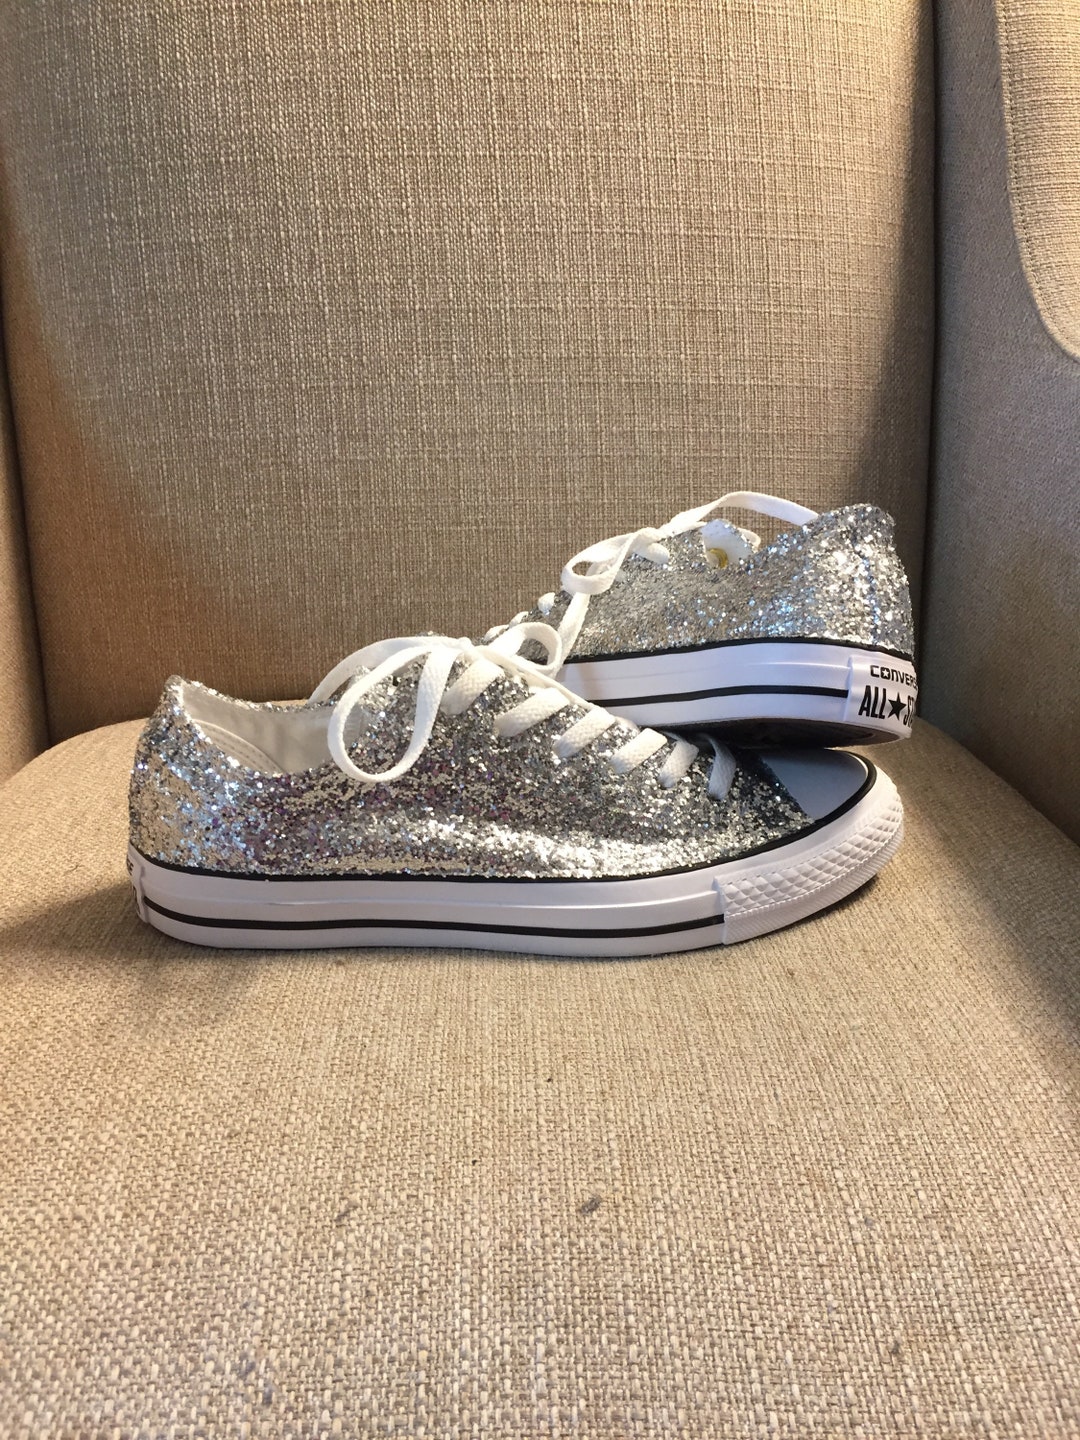 Authentic Converse All Stars in Silver Glitter. Custom Made to Order in ...